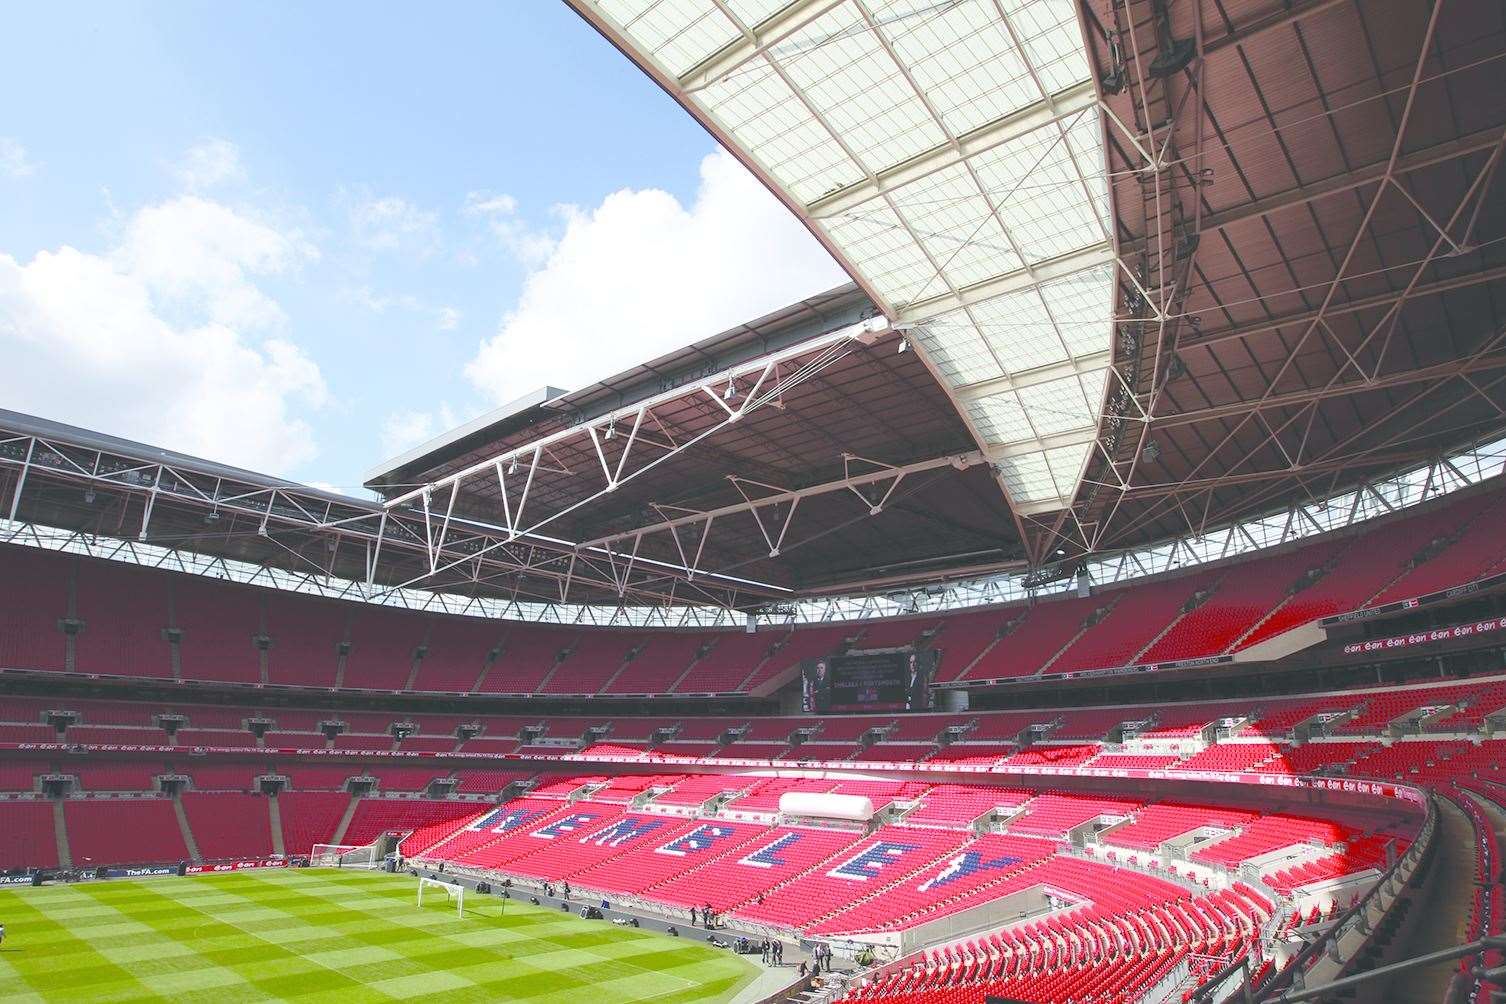 Goals scored at Wembley Stadium are included in the deal for free sausage rolls